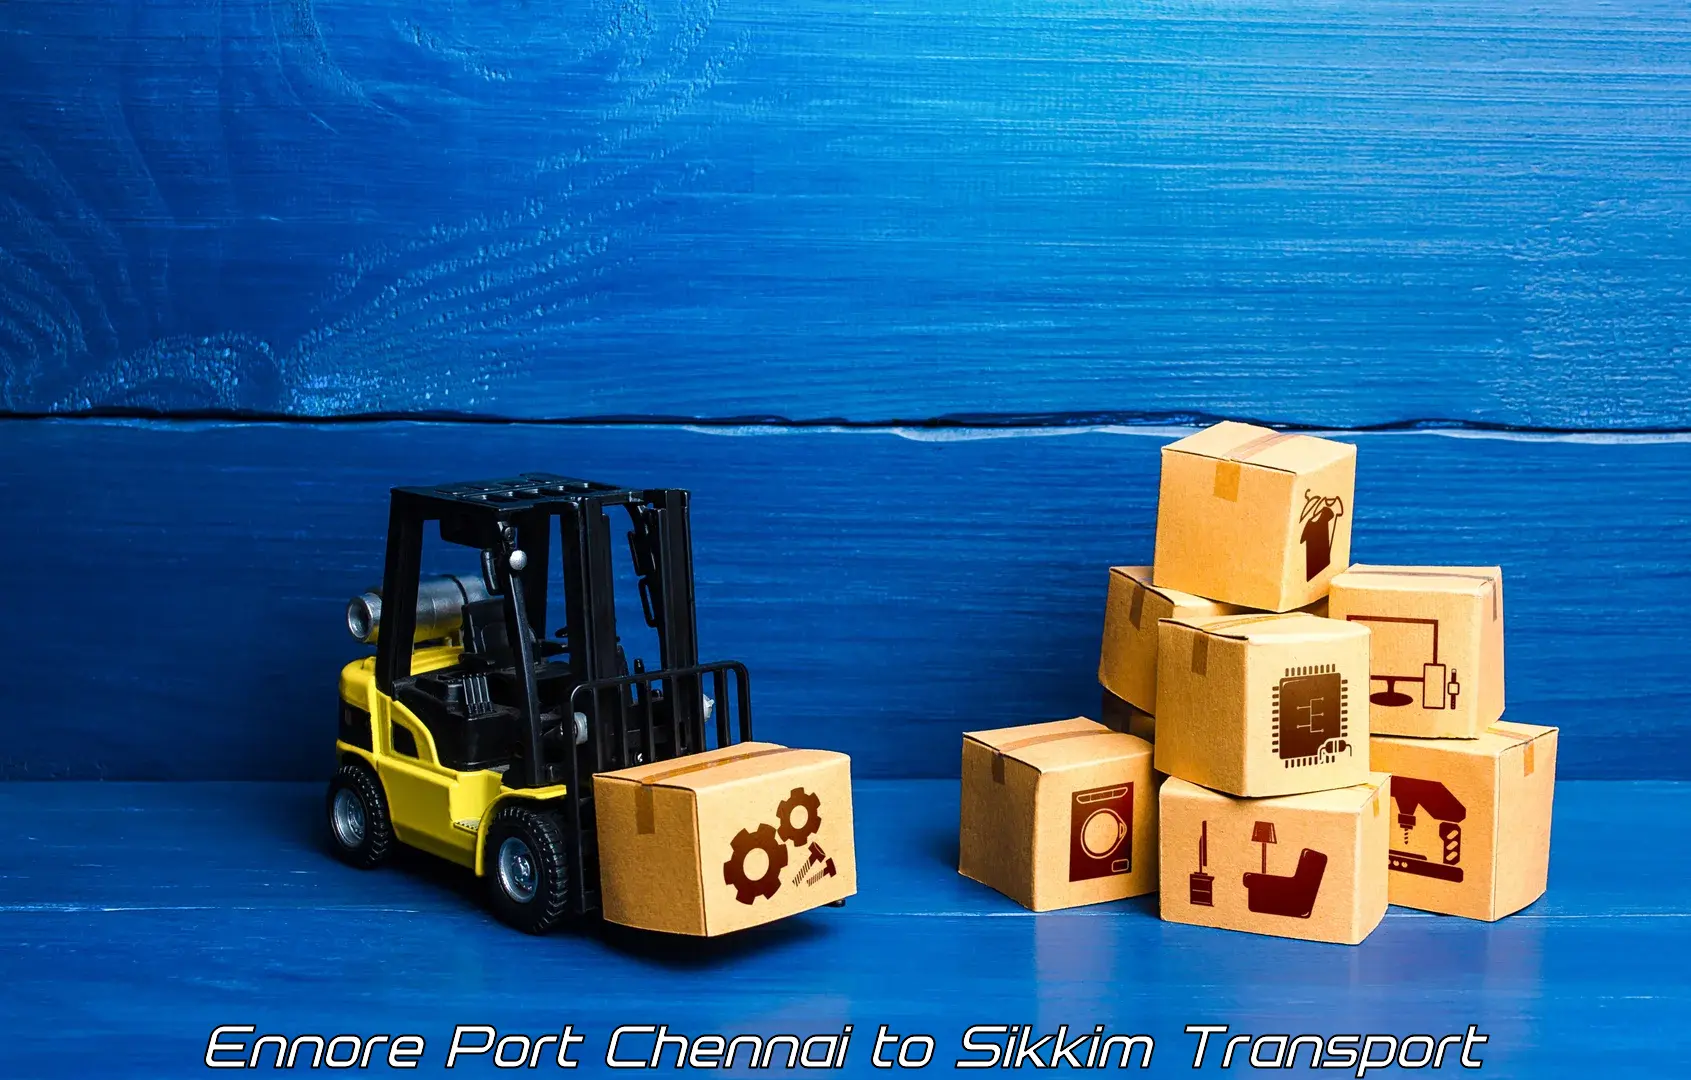 Interstate transport services Ennore Port Chennai to South Sikkim